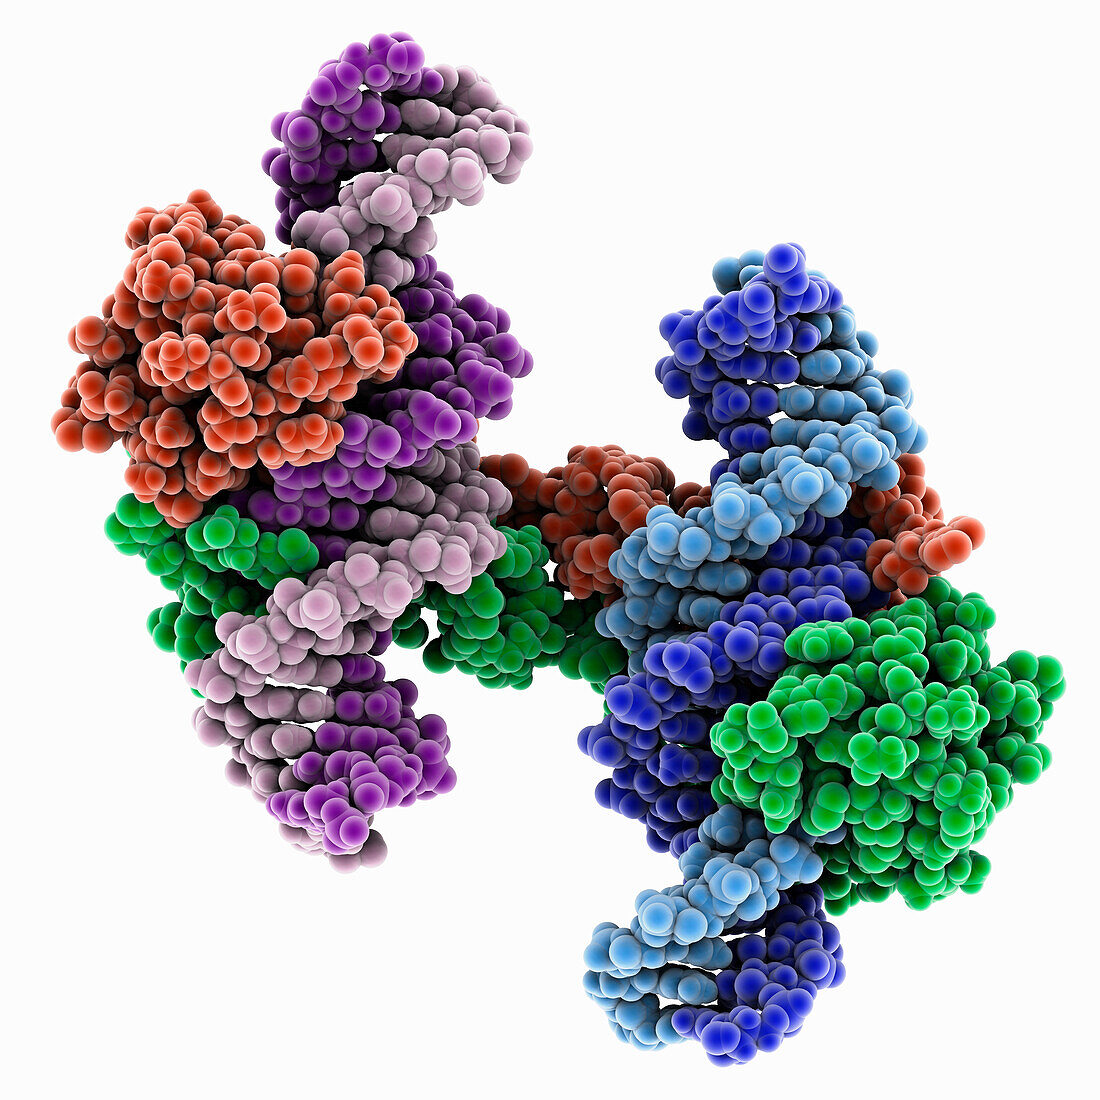 DUX4 domain complexed with DNA, molecular model